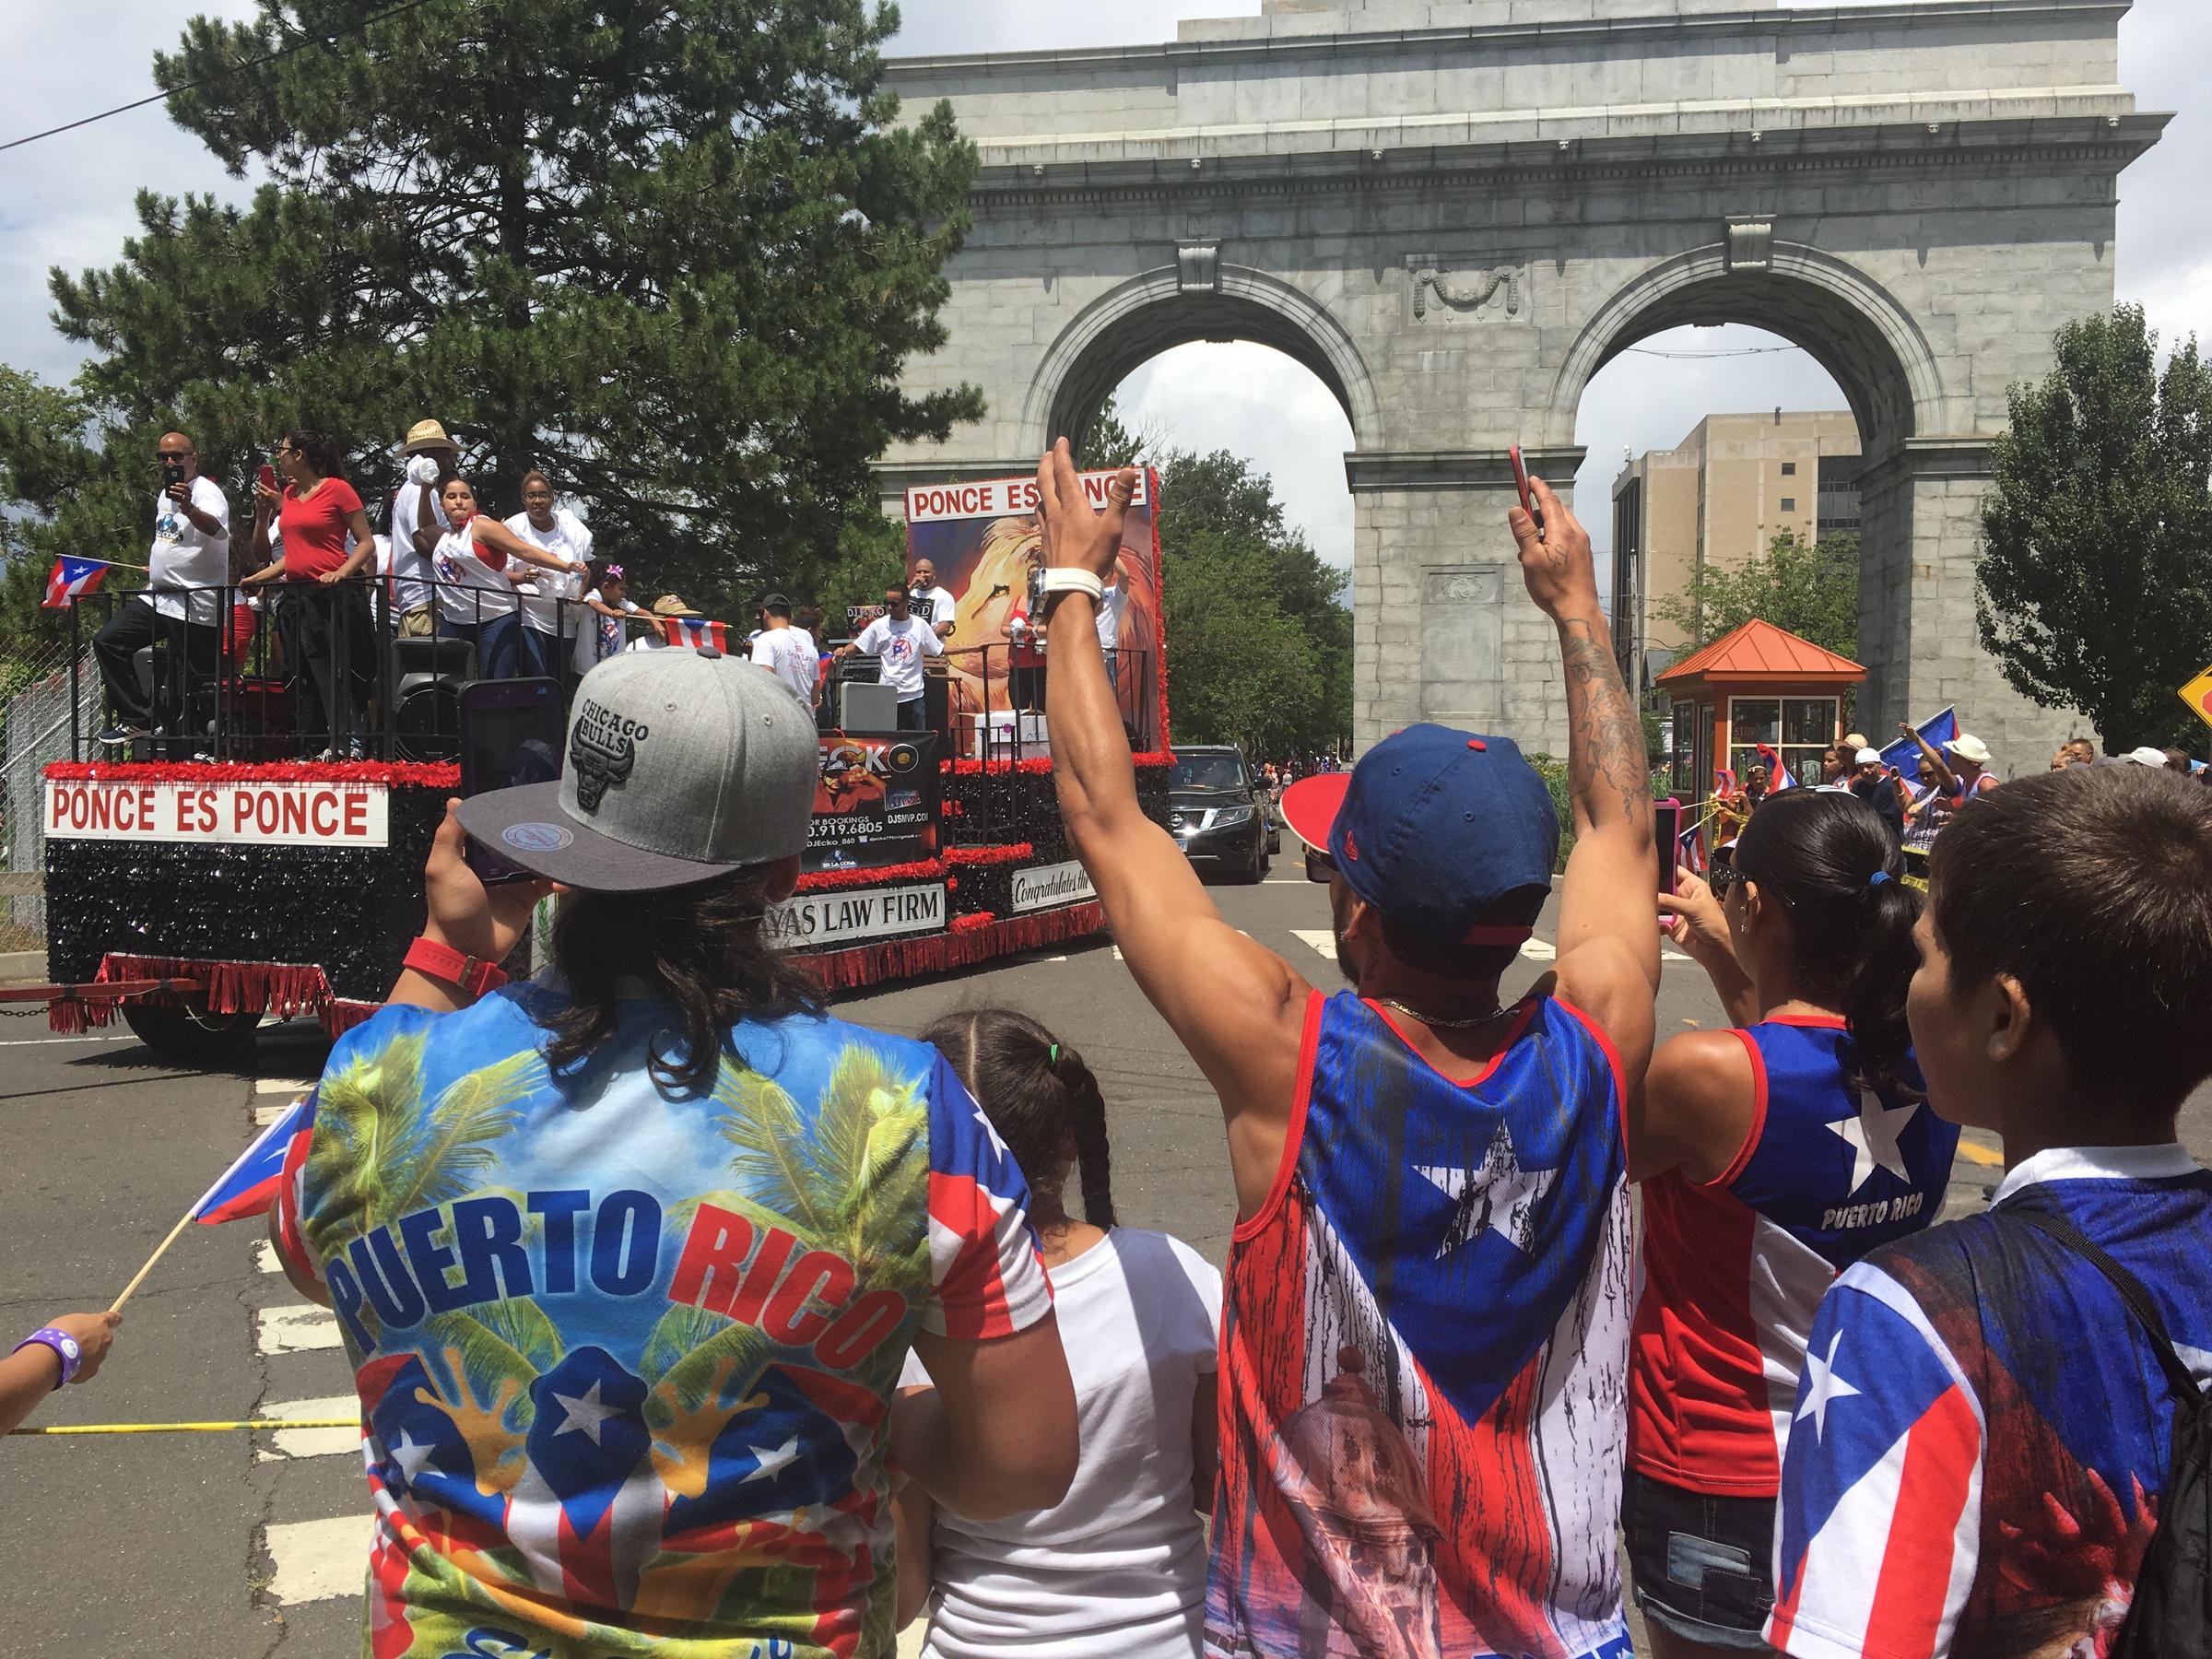 Puerto Rican Day Parade Celebrates Connecticut’s Largest Minority Group